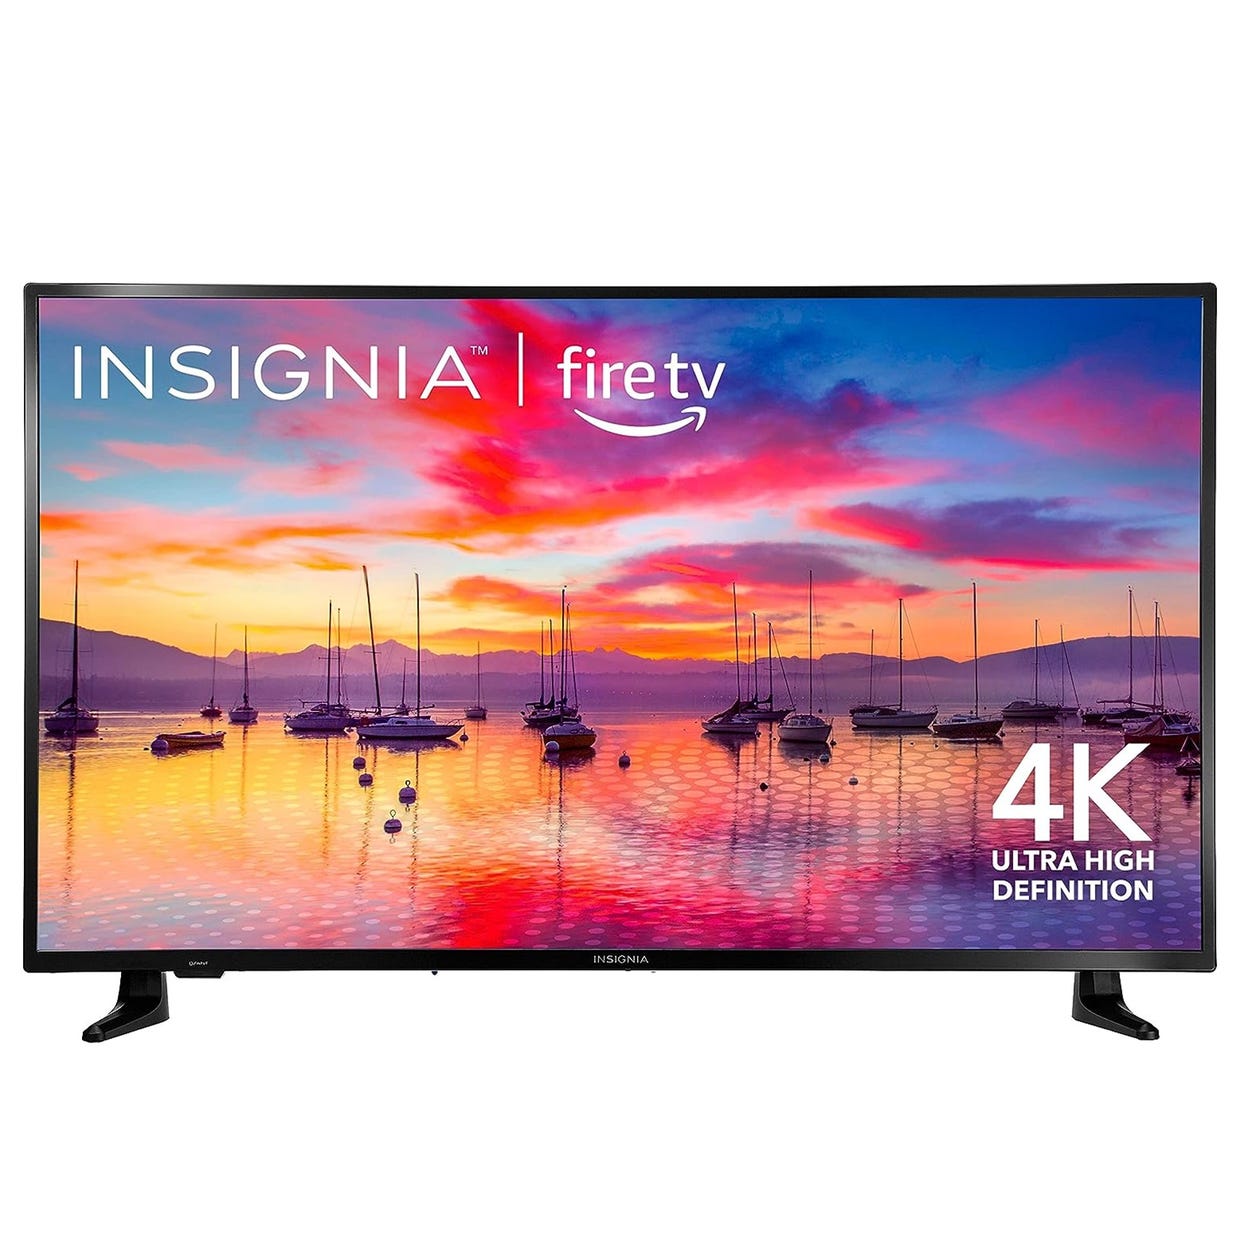 Insignia brand 4K ultra-high-definition television with Fire TV integration.